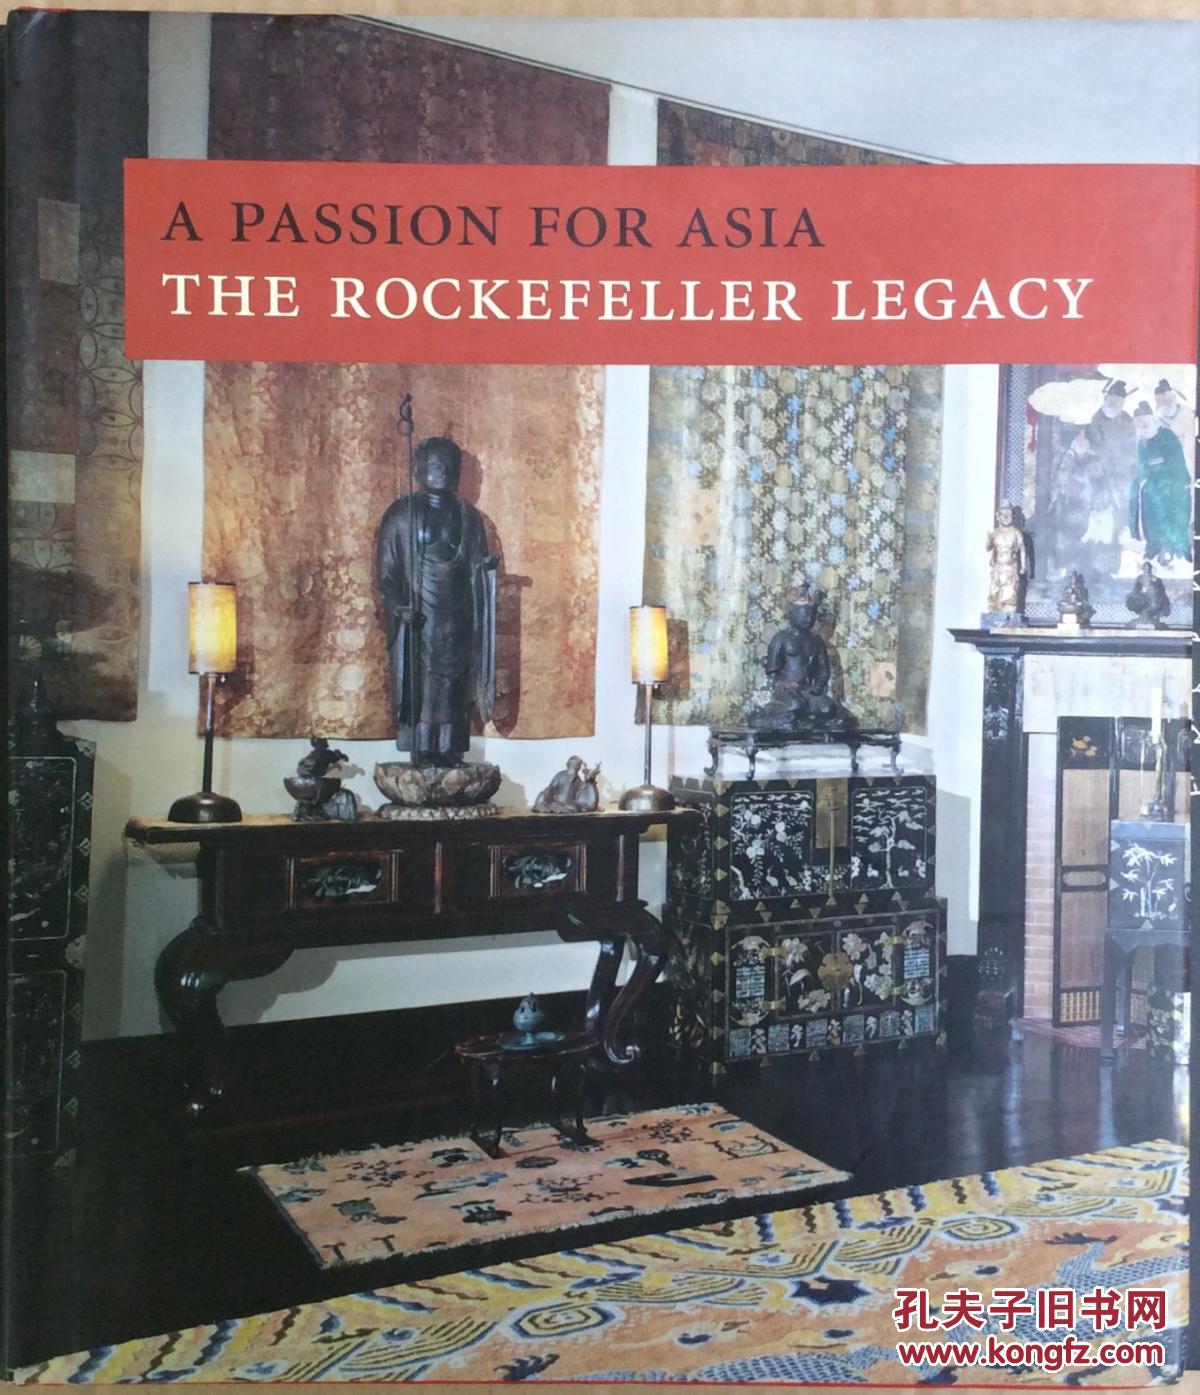 A PASSION FOR ASIA THE ROCKEFELLER LEGACY